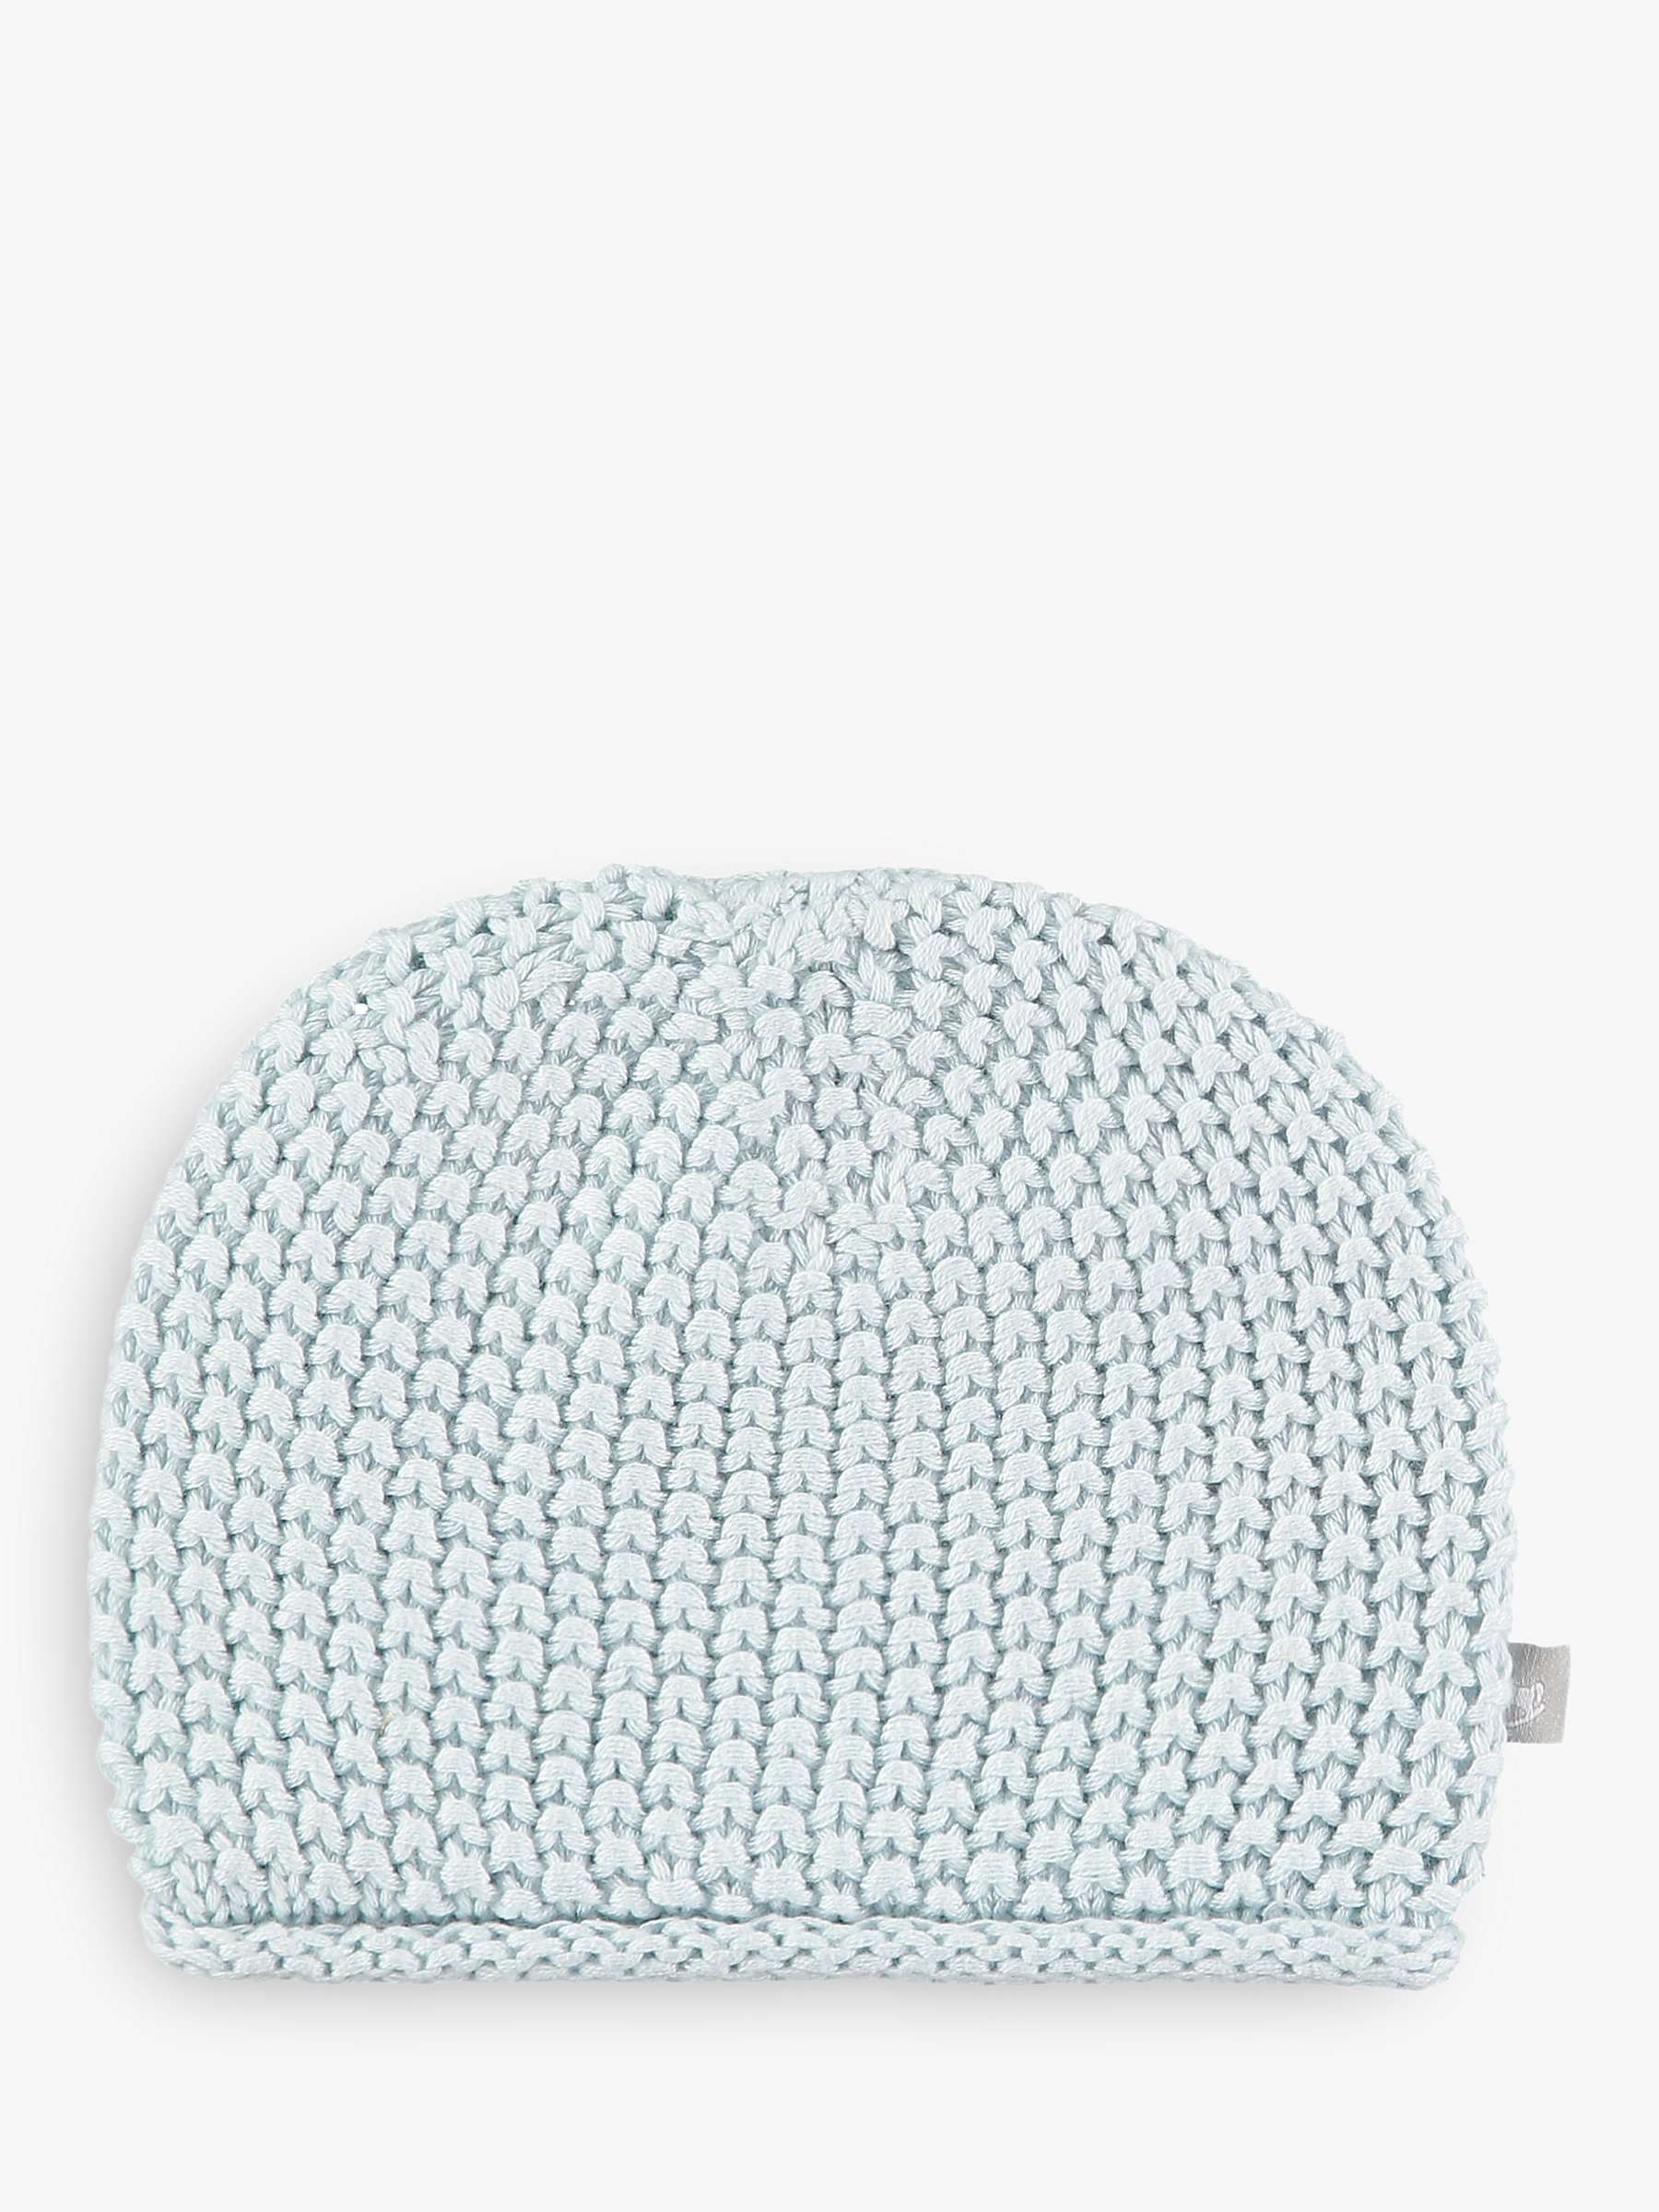 Buy The Little Tailor Baby Chunky Knit Hat Online at johnlewis.com